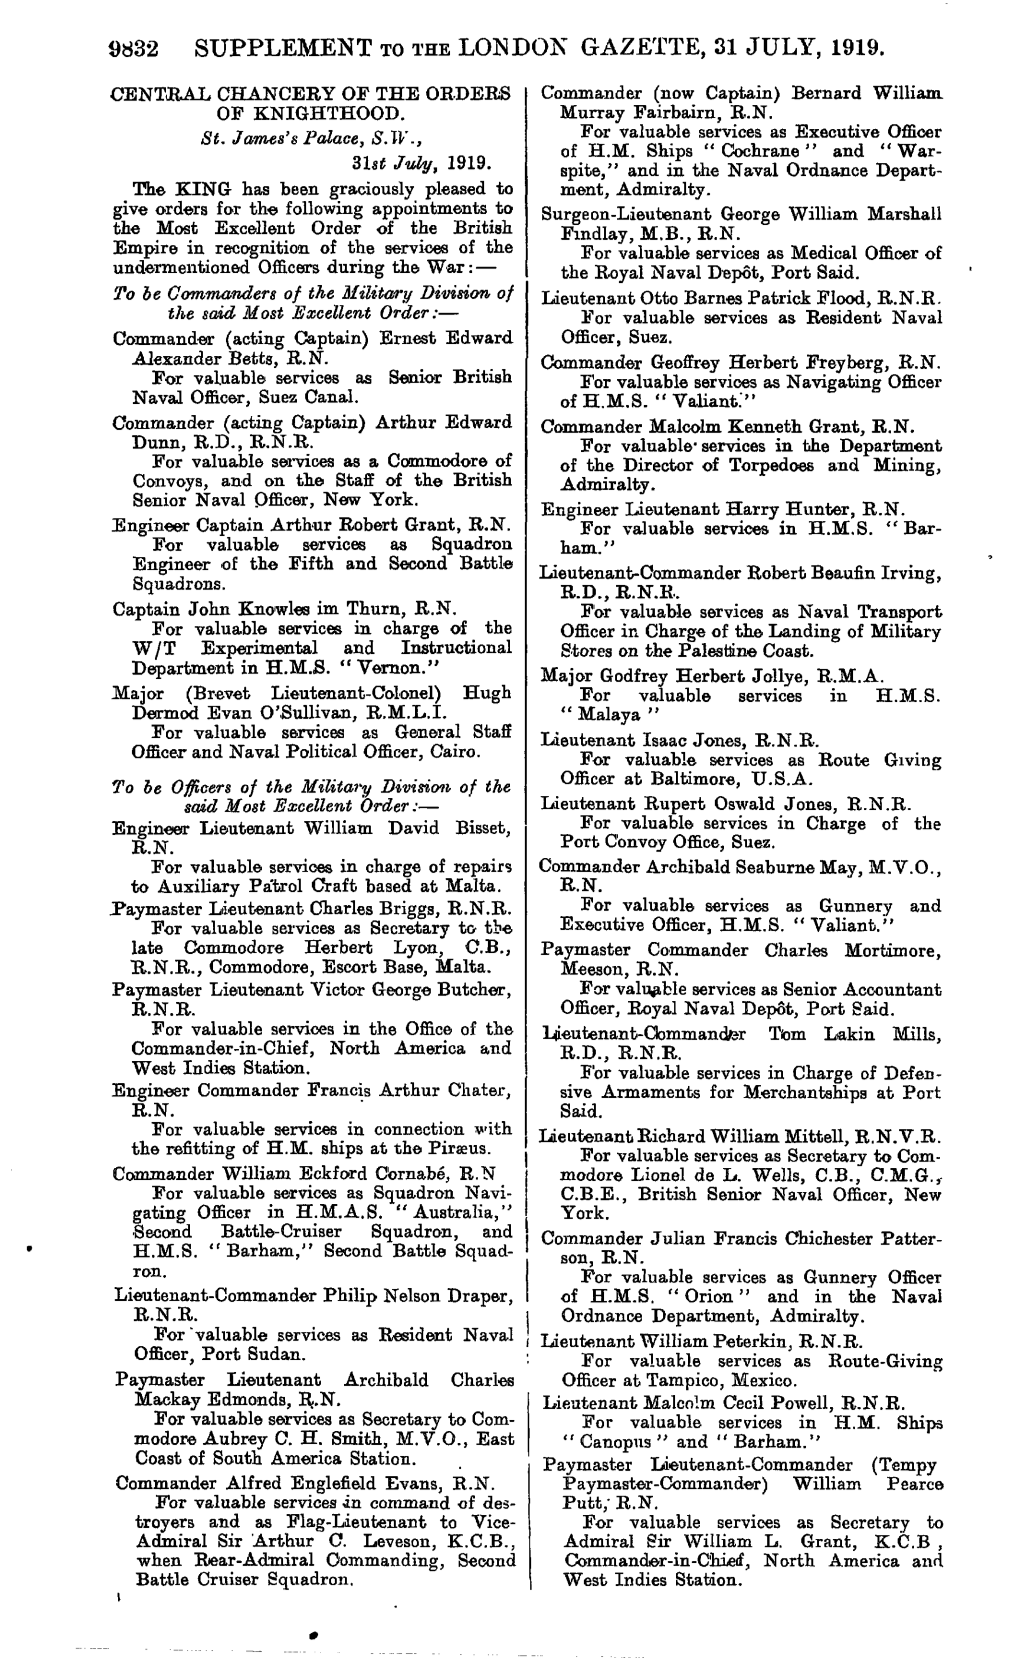 9832 Supplement to the London Gazette, 31 July, 1919